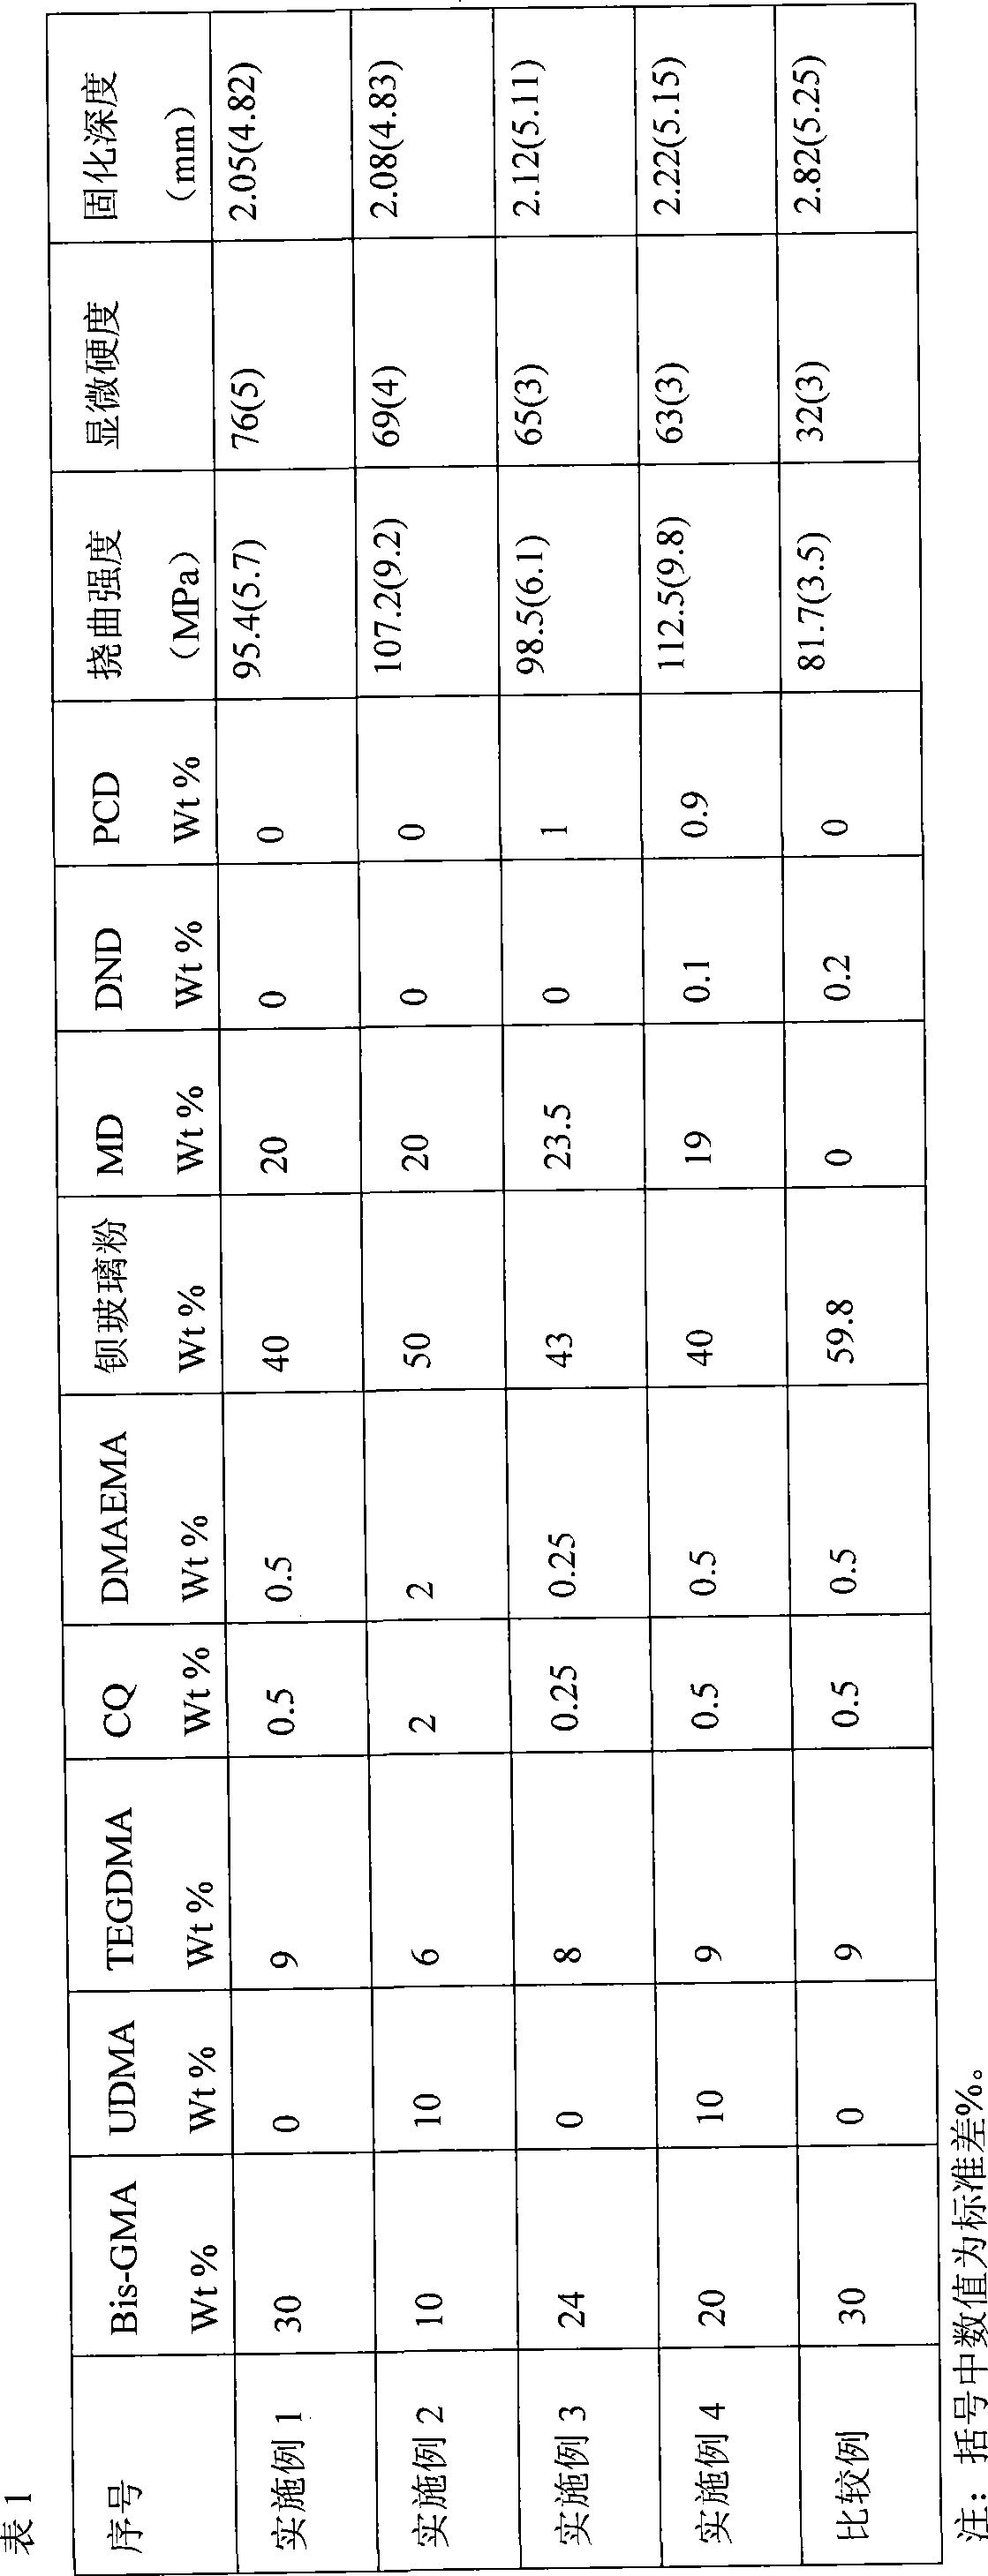 Light-cured composite resin for oral cavity by using single crystal diamond as filler and preparation method thereof